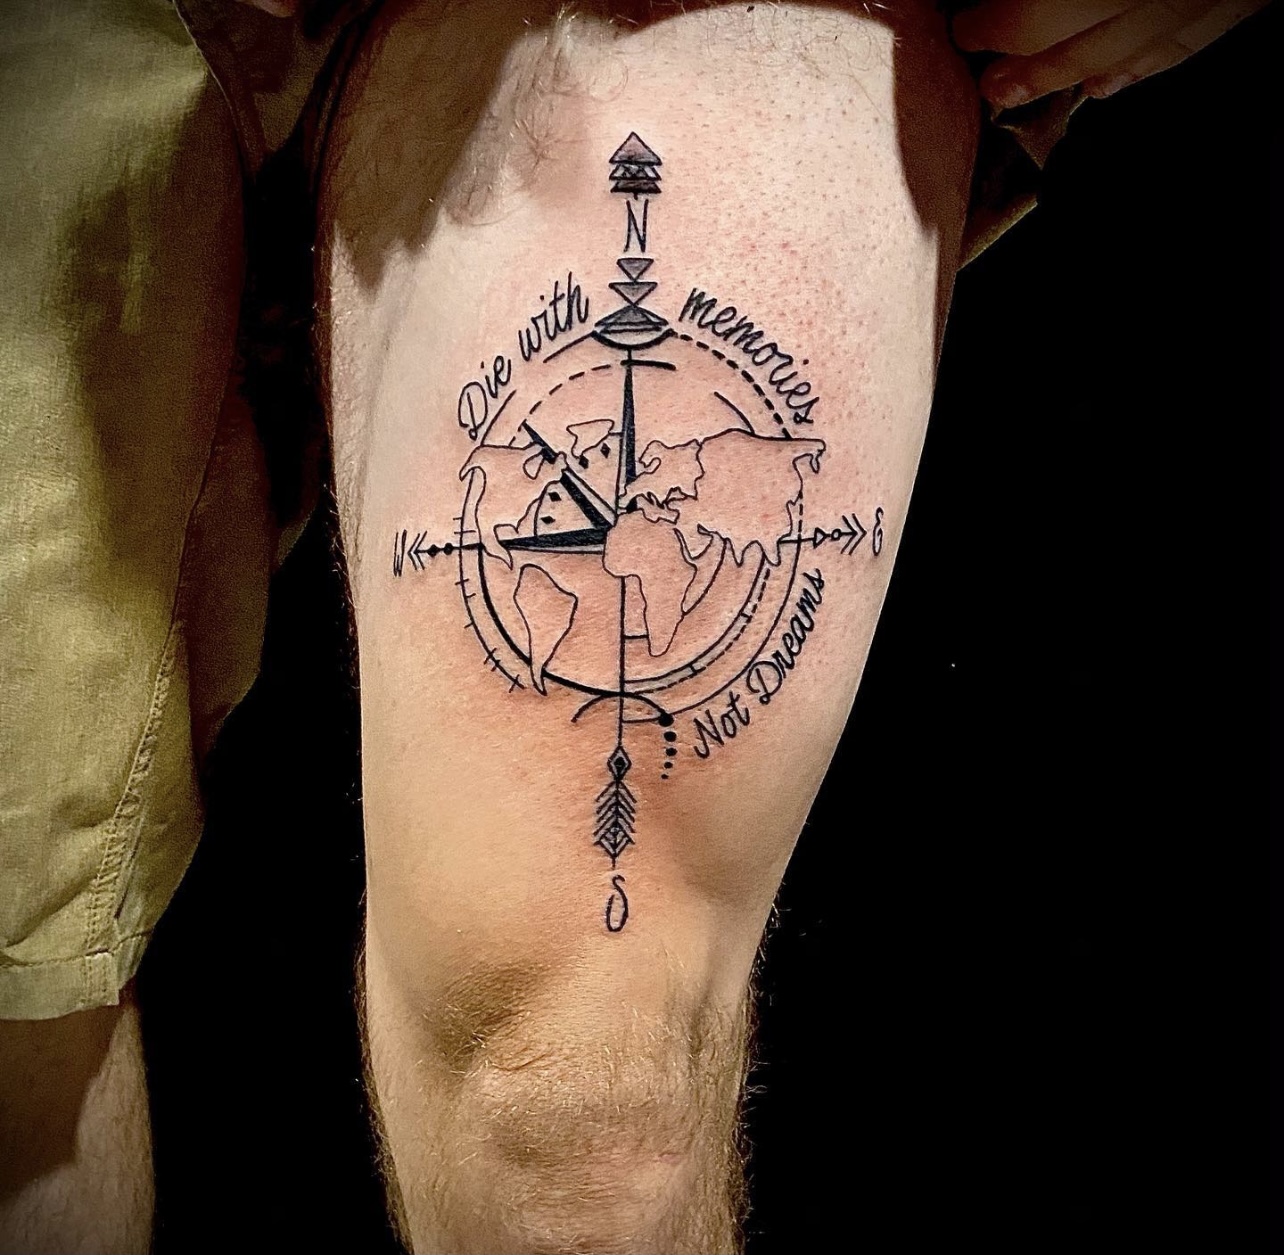 A tattoo of a compass with the words 